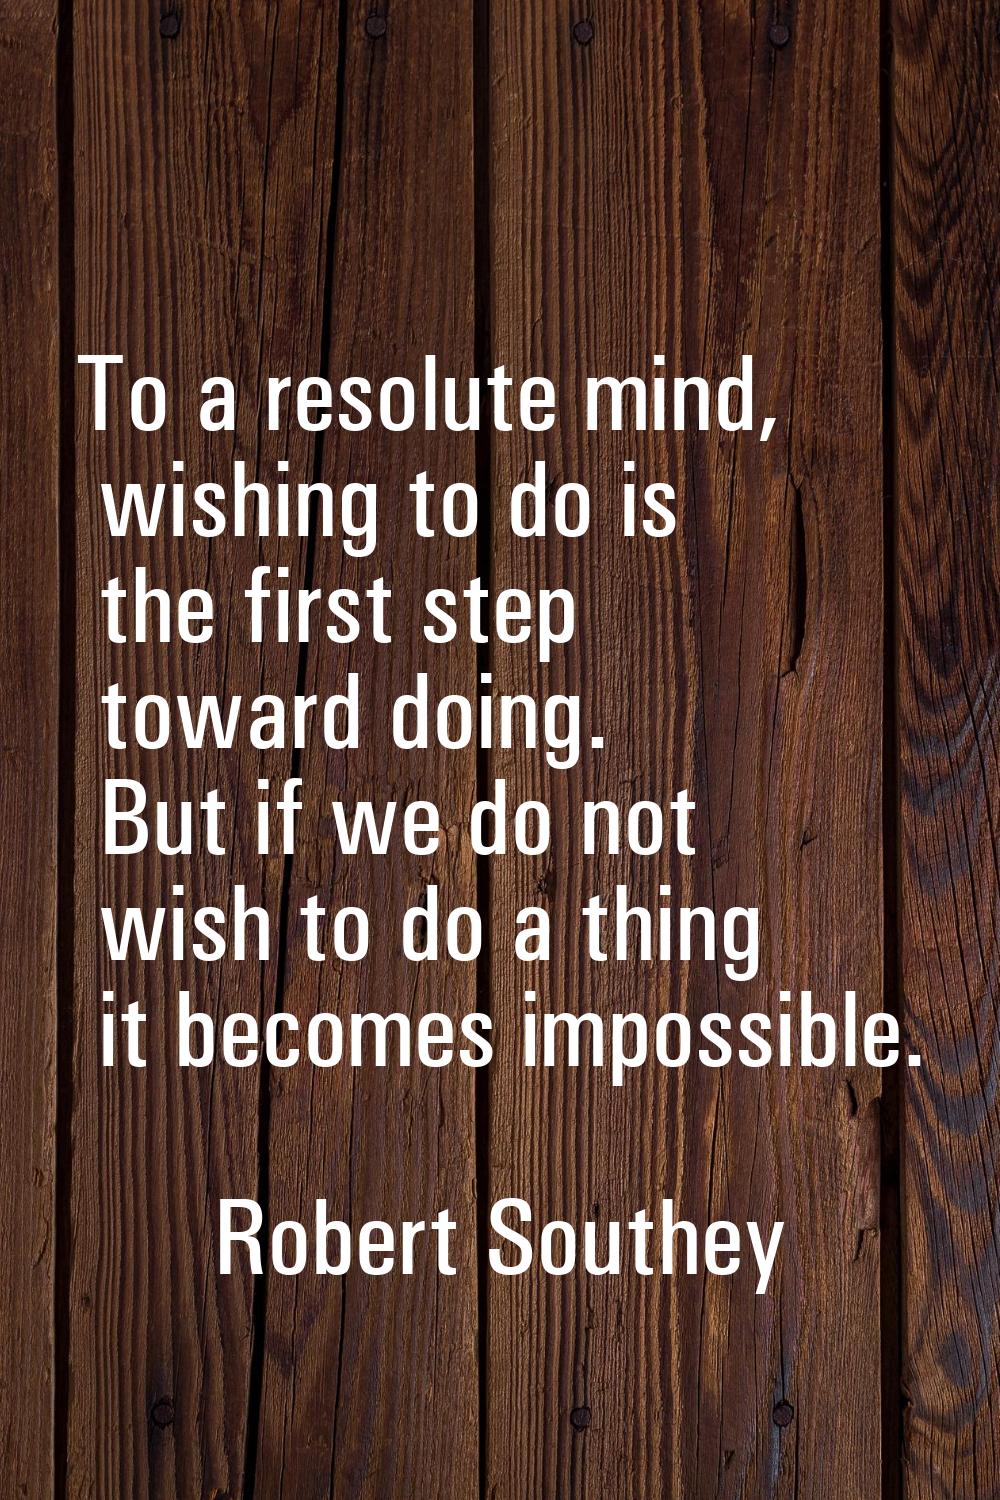 To a resolute mind, wishing to do is the first step toward doing. But if we do not wish to do a thi